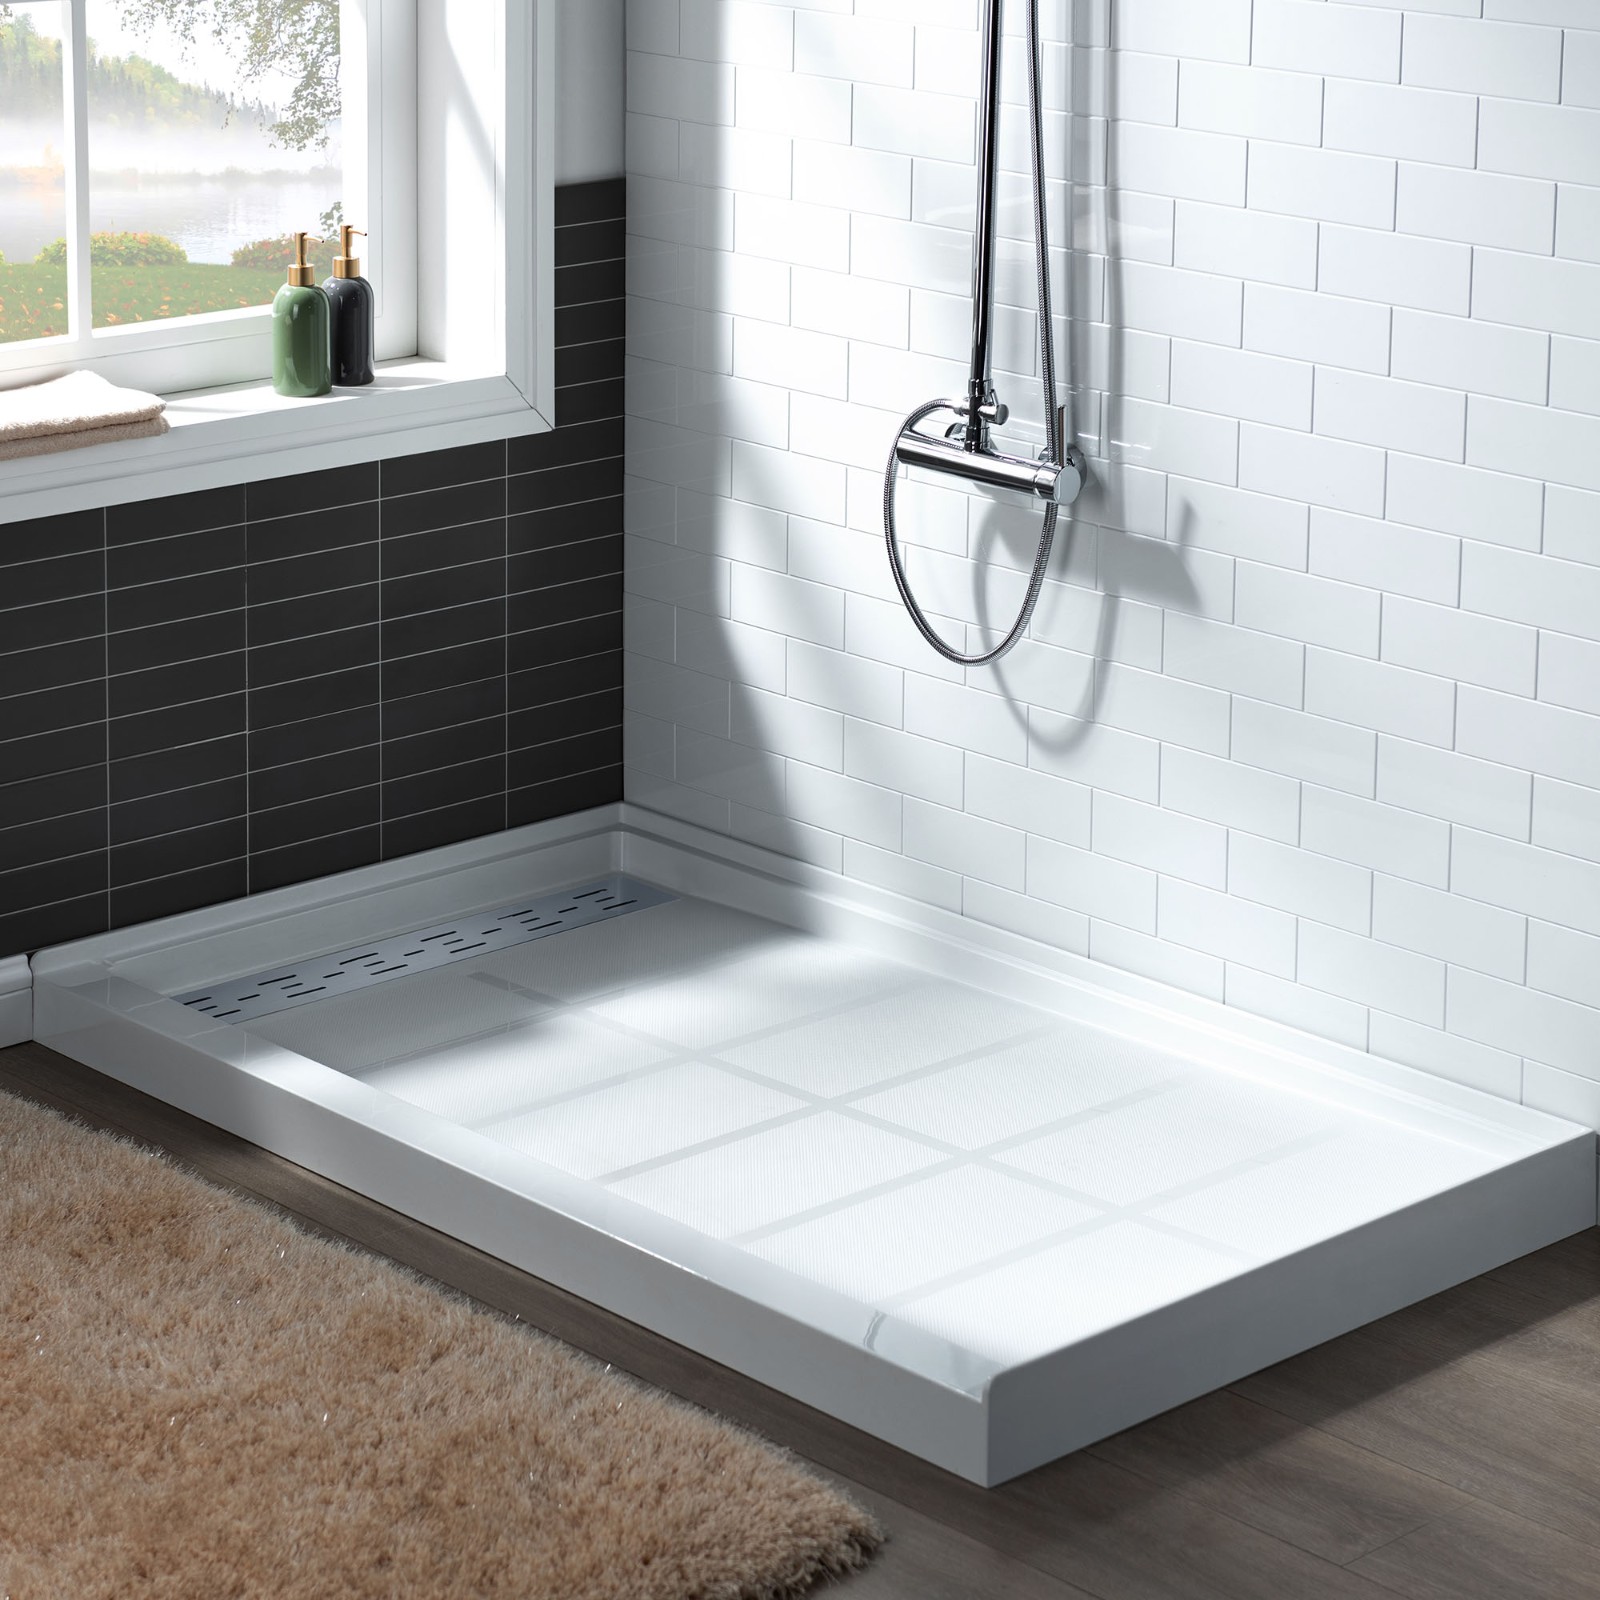  WOODBRIDGE SBR6030-1000L-CH SolidSurface Shower Base with Recessed Trench Side Including  Chrome Linear Cover, 60